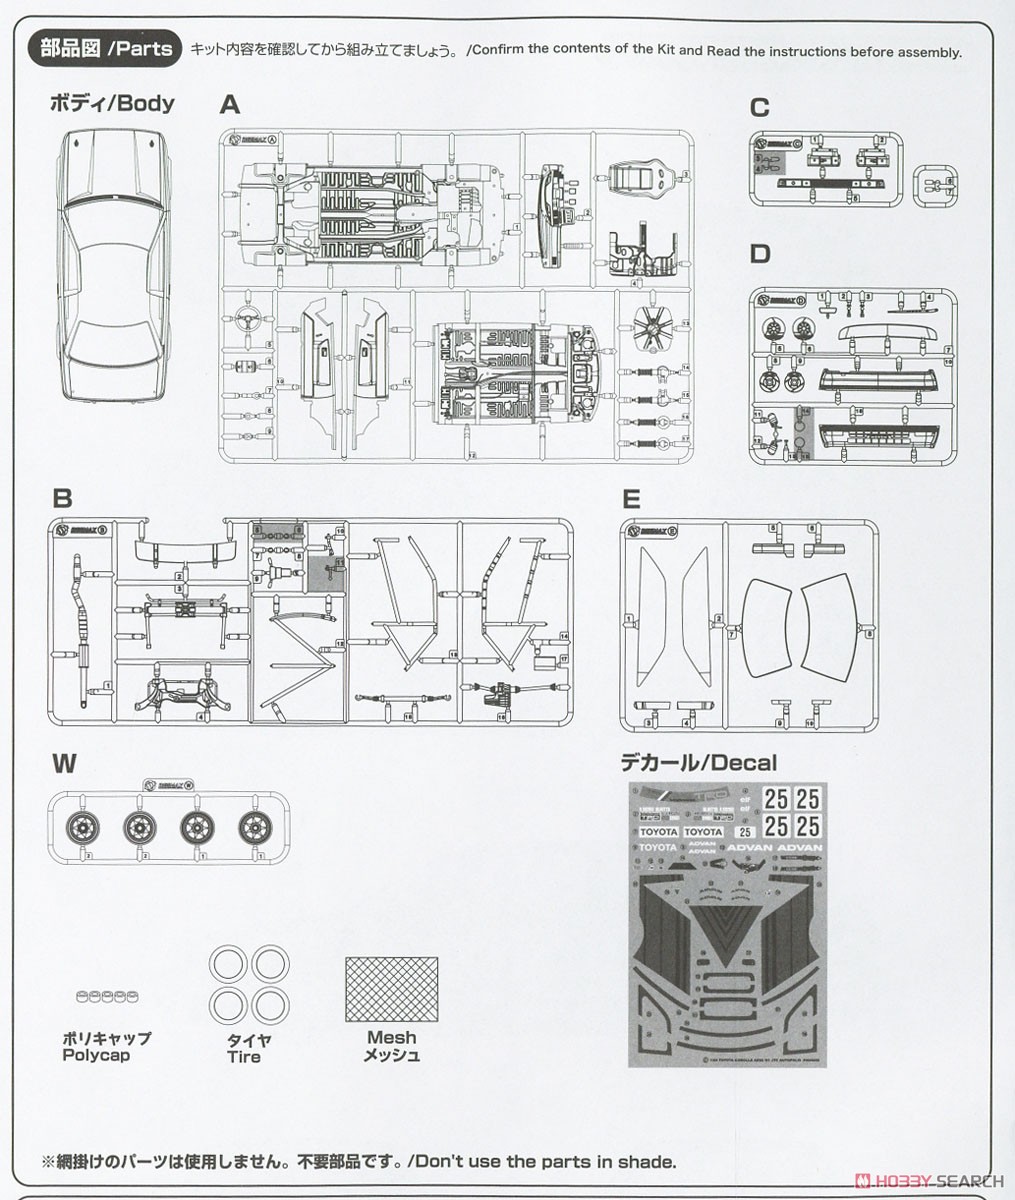 1/24 Racing Series Toyota Corolla Levin AE92 Gr.A 1991 Autopolis International Racing Course (Model Car) Assembly guide10